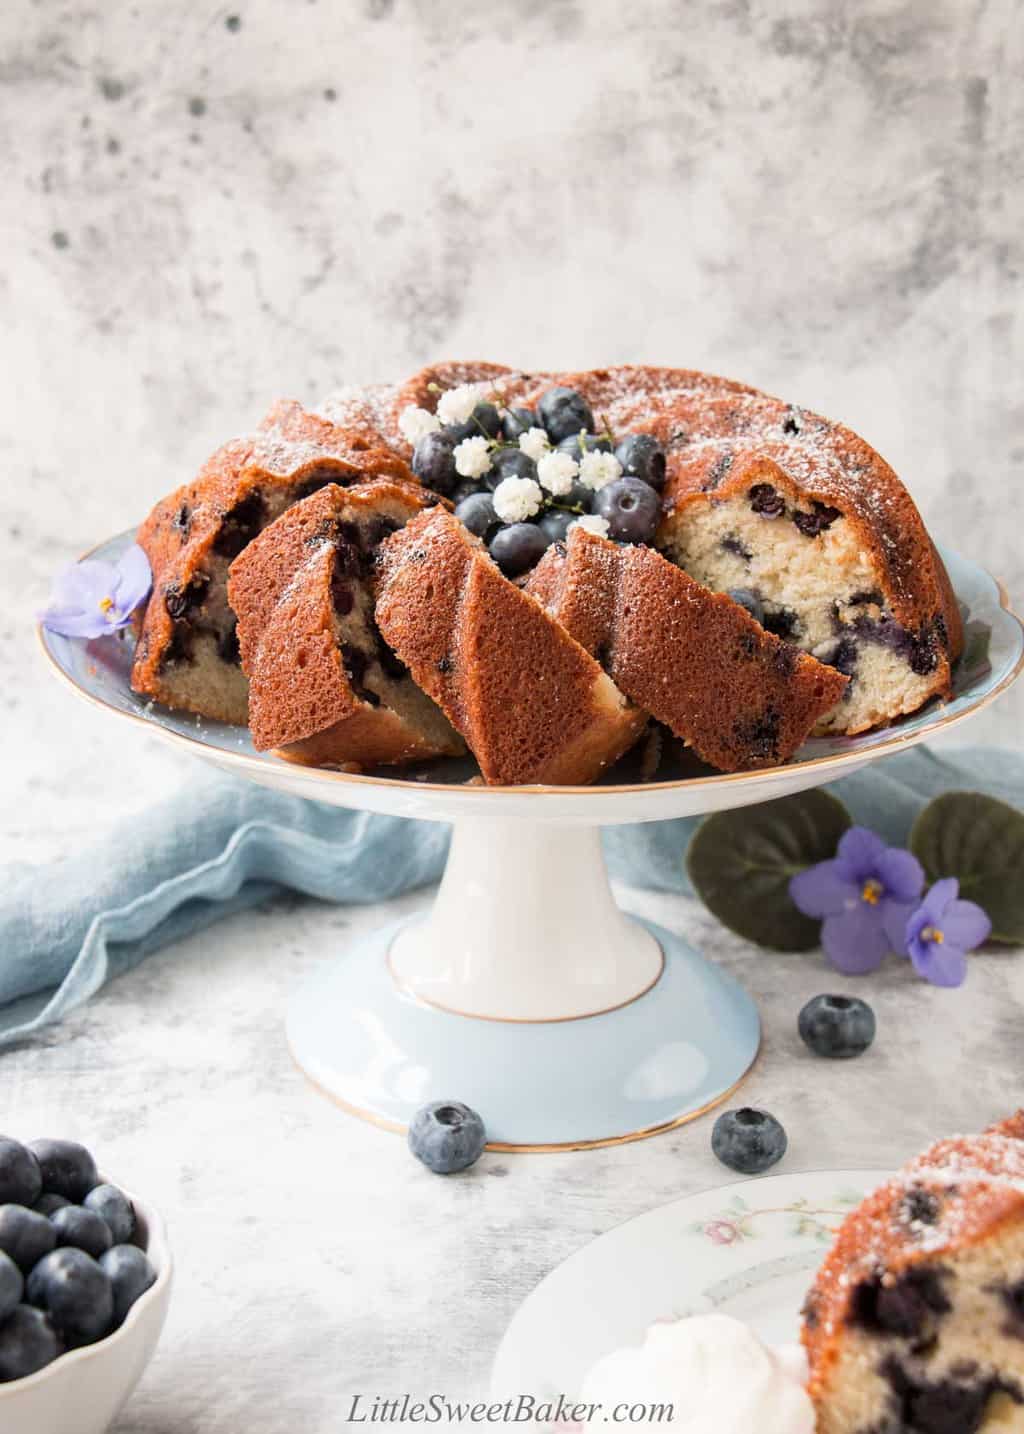 Poppy Seed Blueberry Cake - Home Cooking Adventure